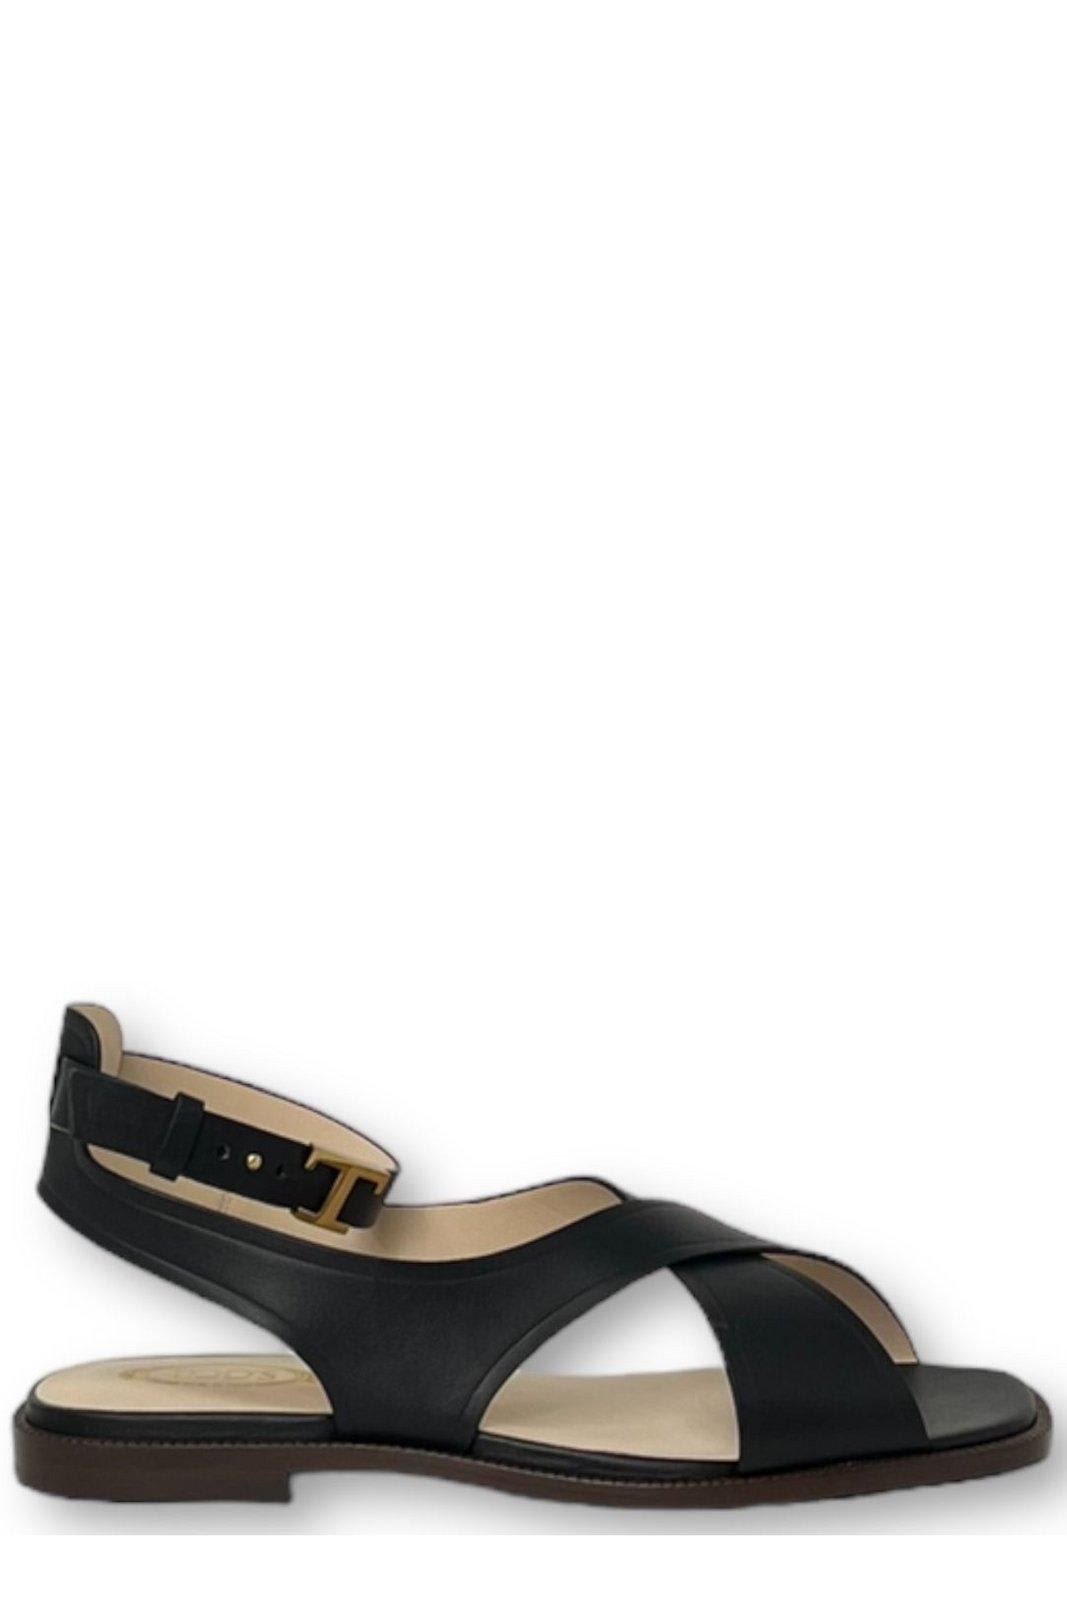 TOD'S LOGO-PLAQUE SLINGBACK SANDALS TODS